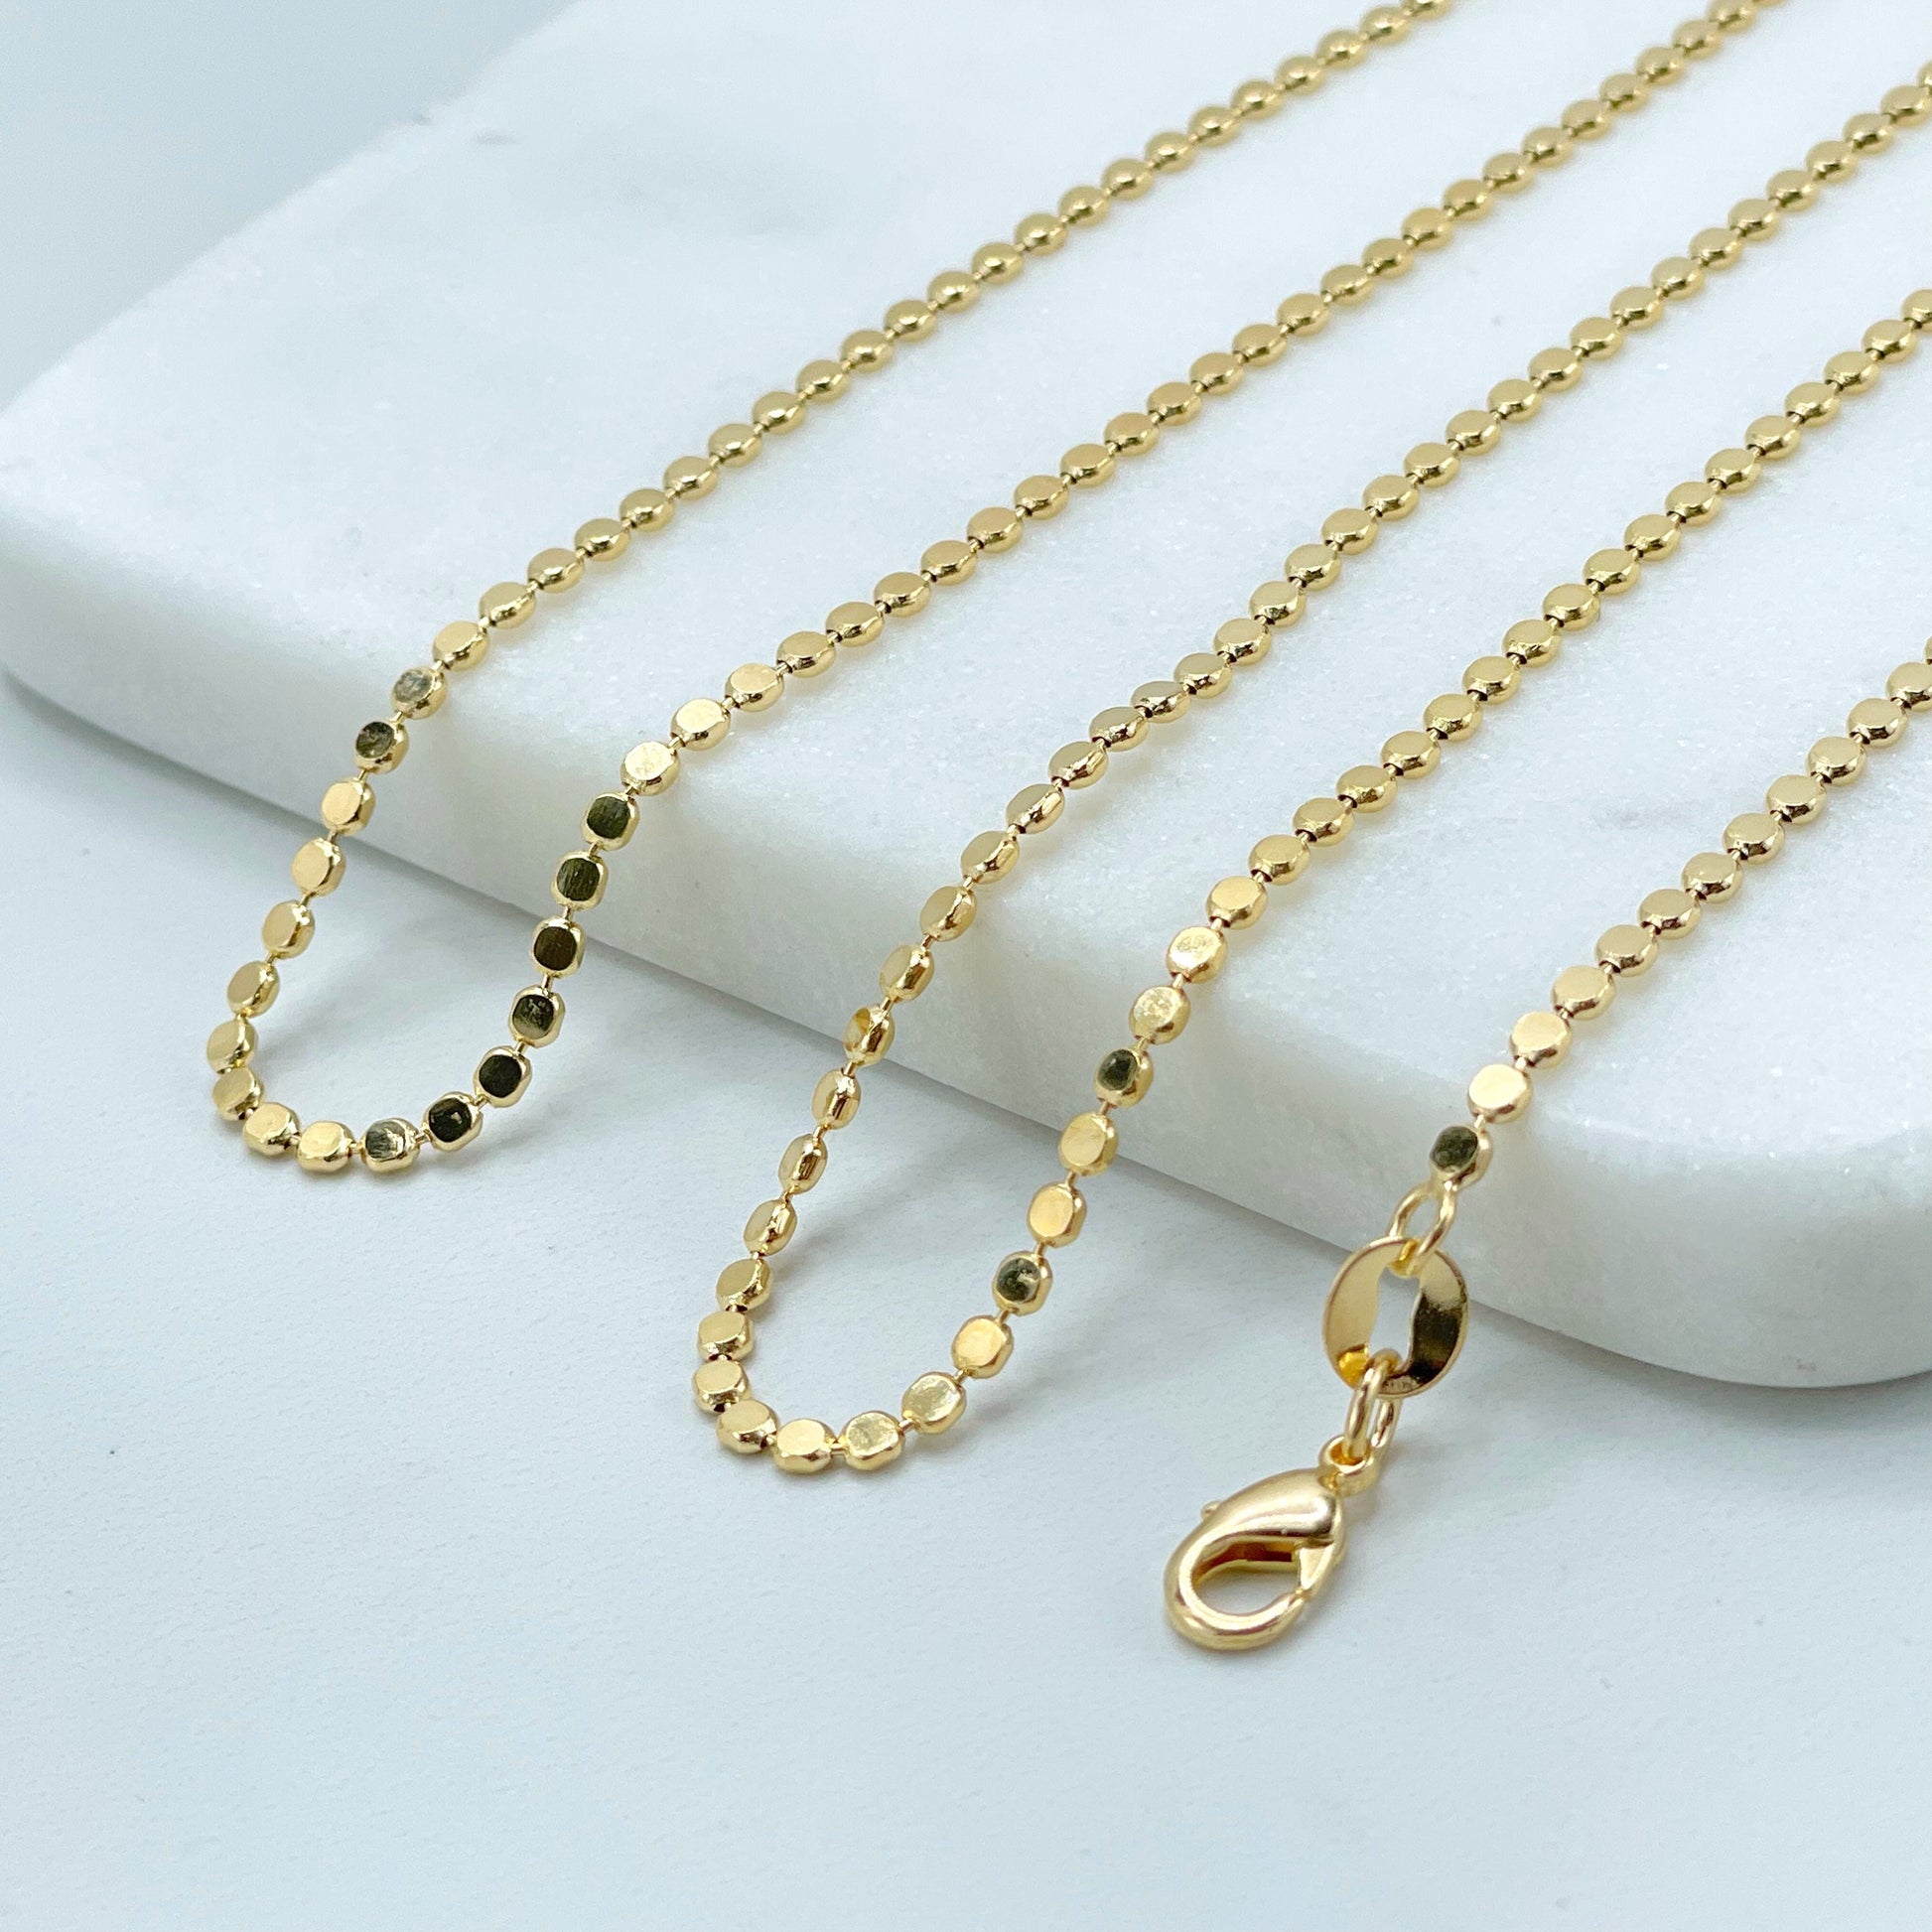 18k Gold Filled 1.5mm Dot Link Chain 18 or 24 inches Necklace Wholesale Jewelry Supplies